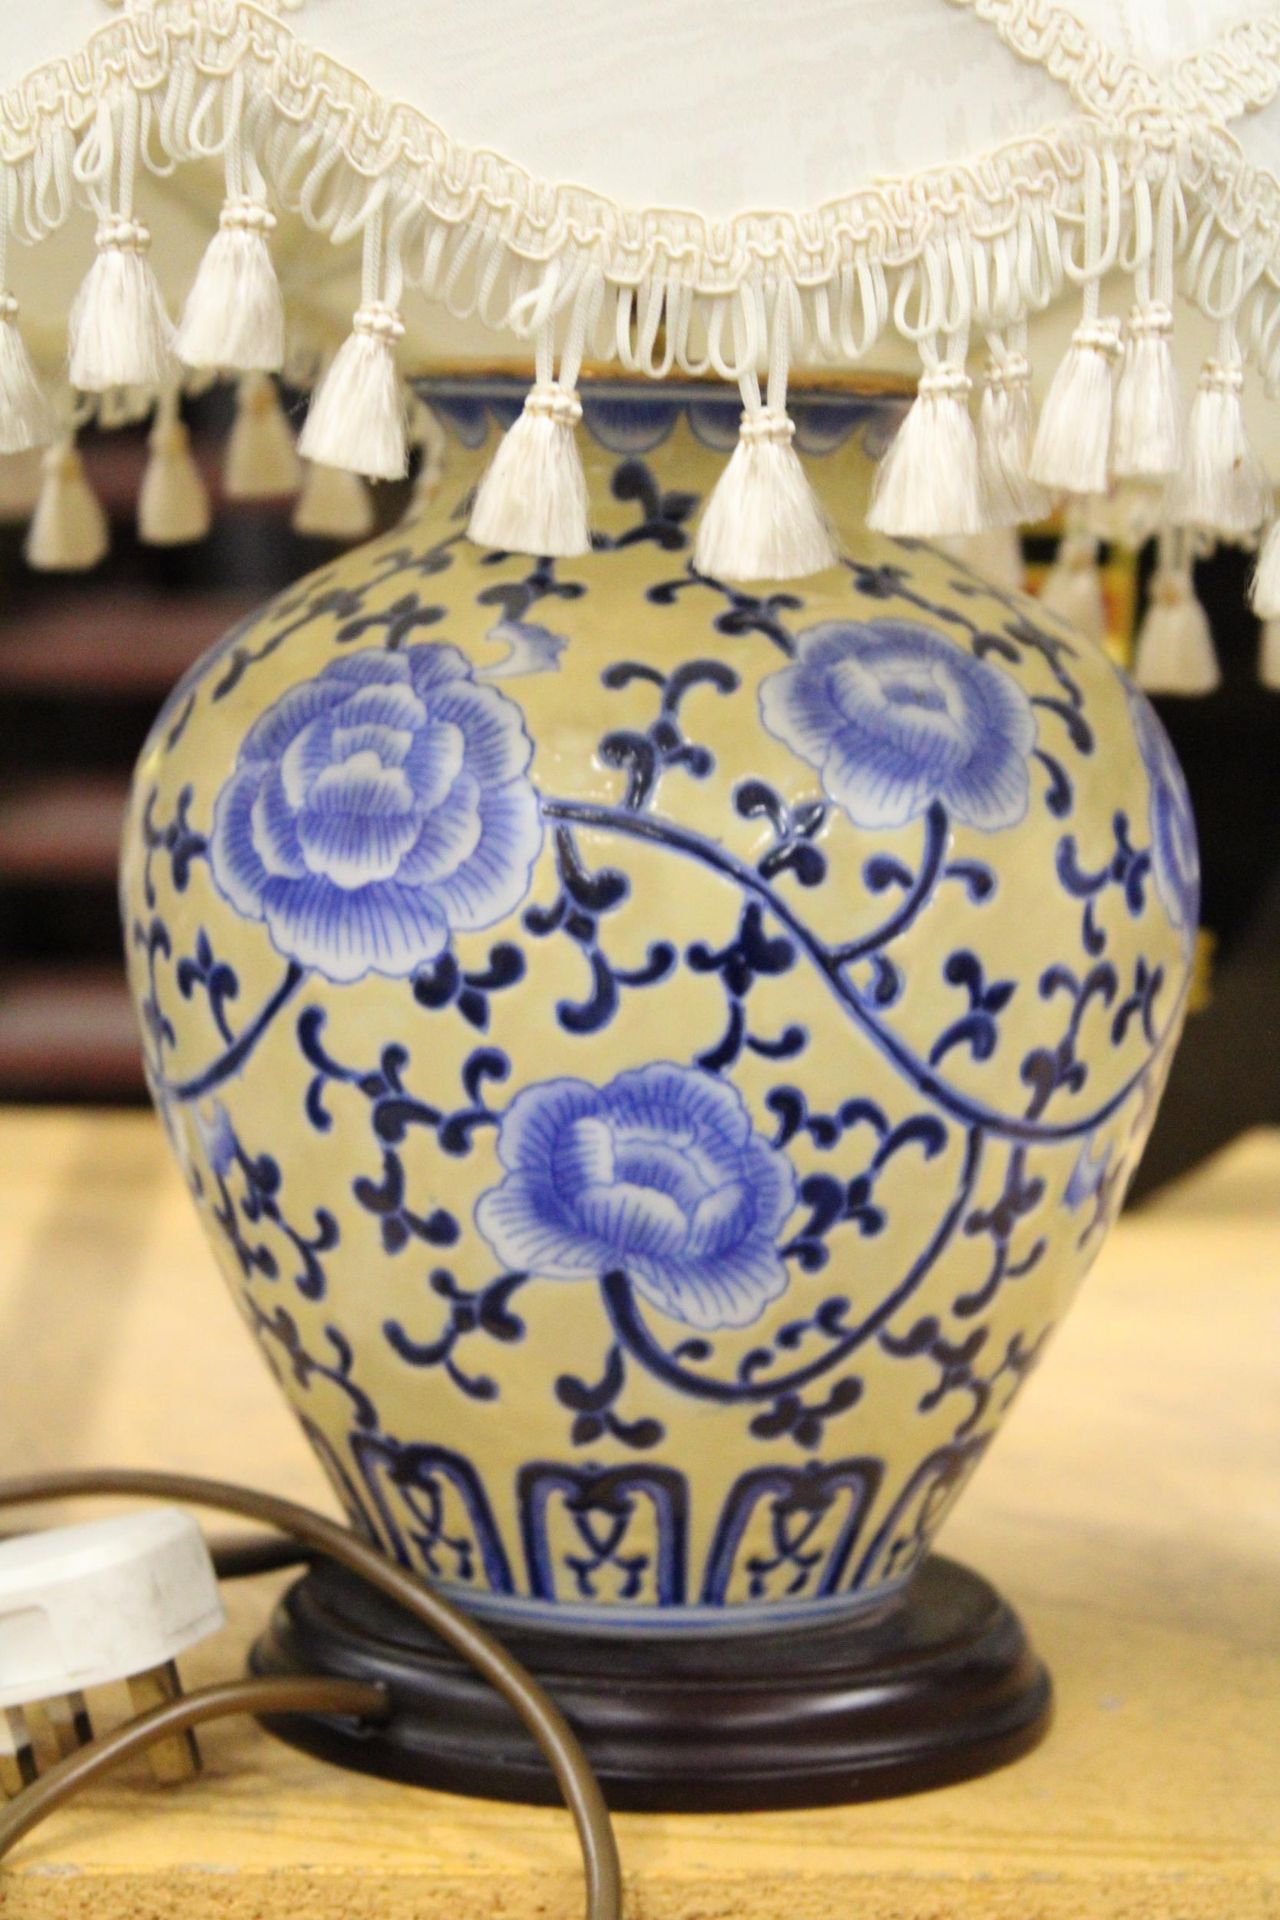 A BLUE AND CREAM ORIENTAL STYLE LAMP WITH SHADE - Image 2 of 4